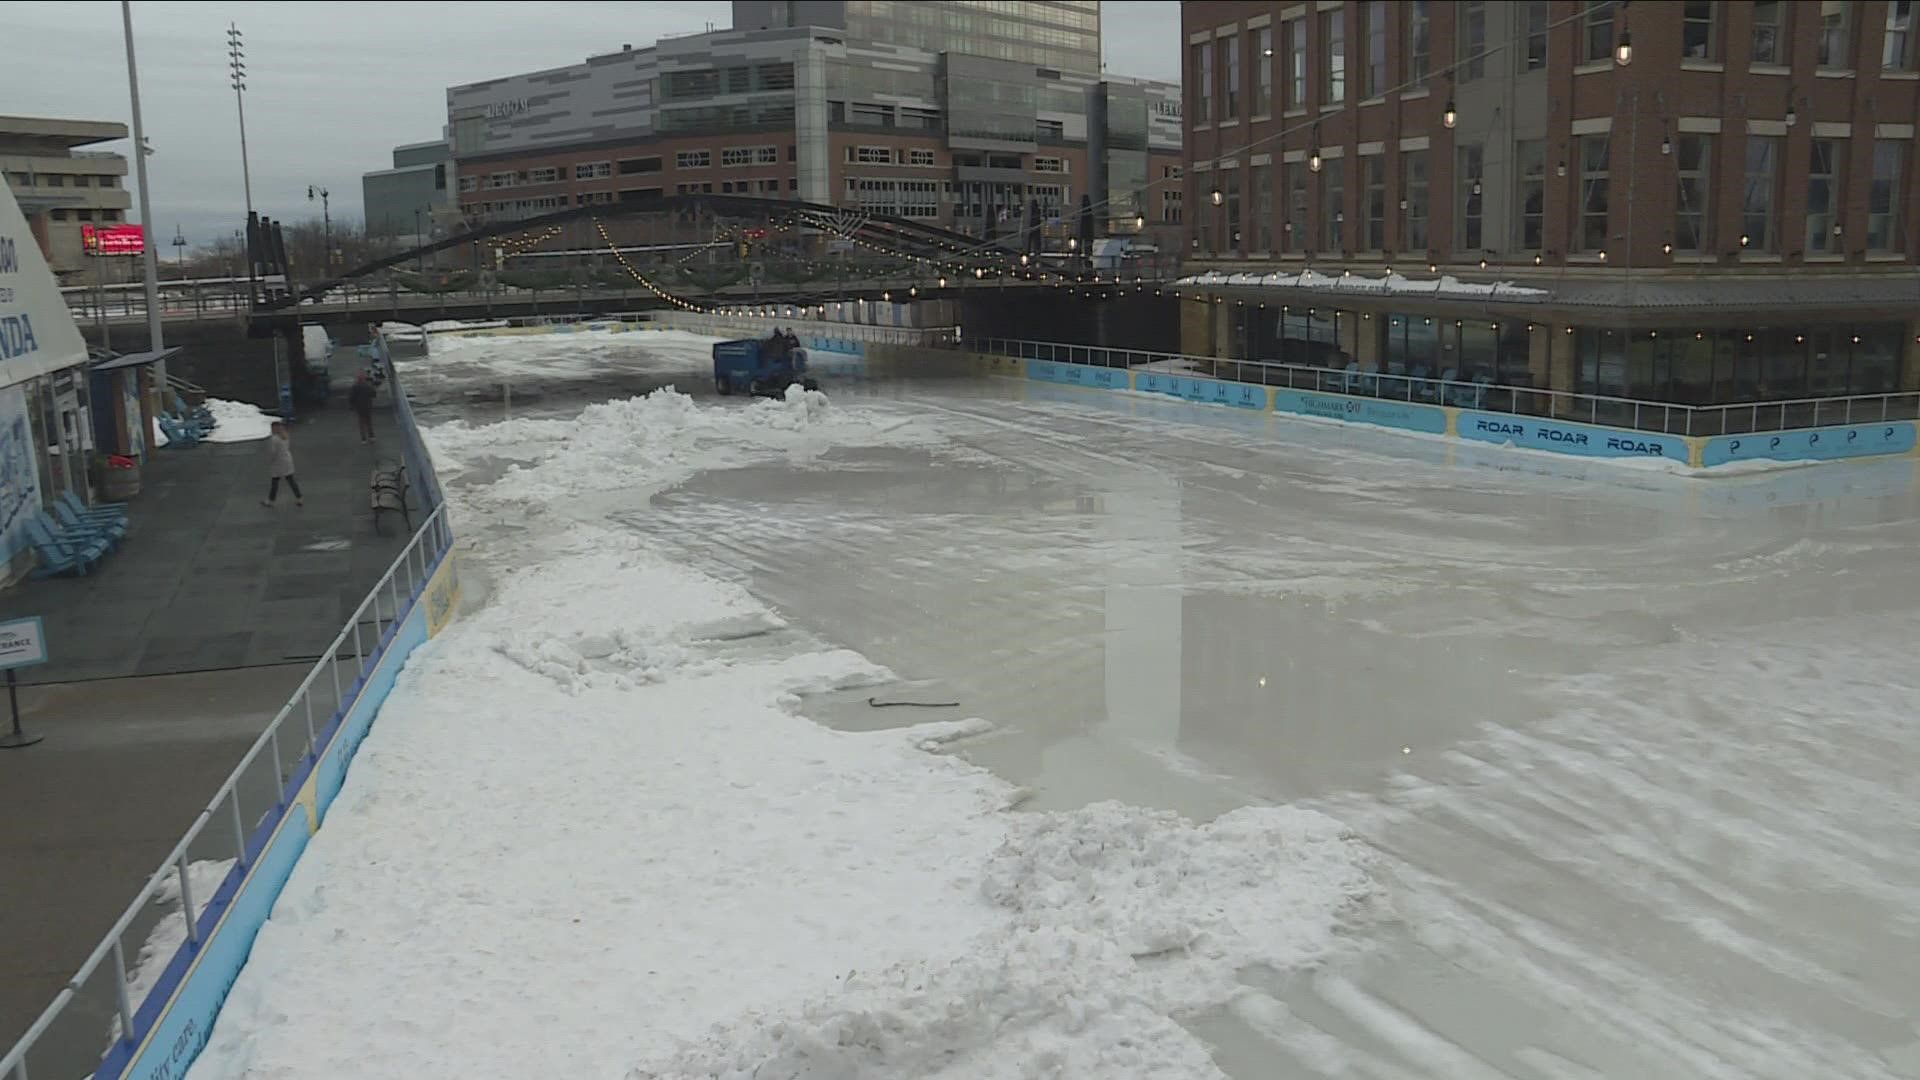 Crews did get the extra snow cleared off from the rink on Friday, but now they are working on melting and scraping down the rink.